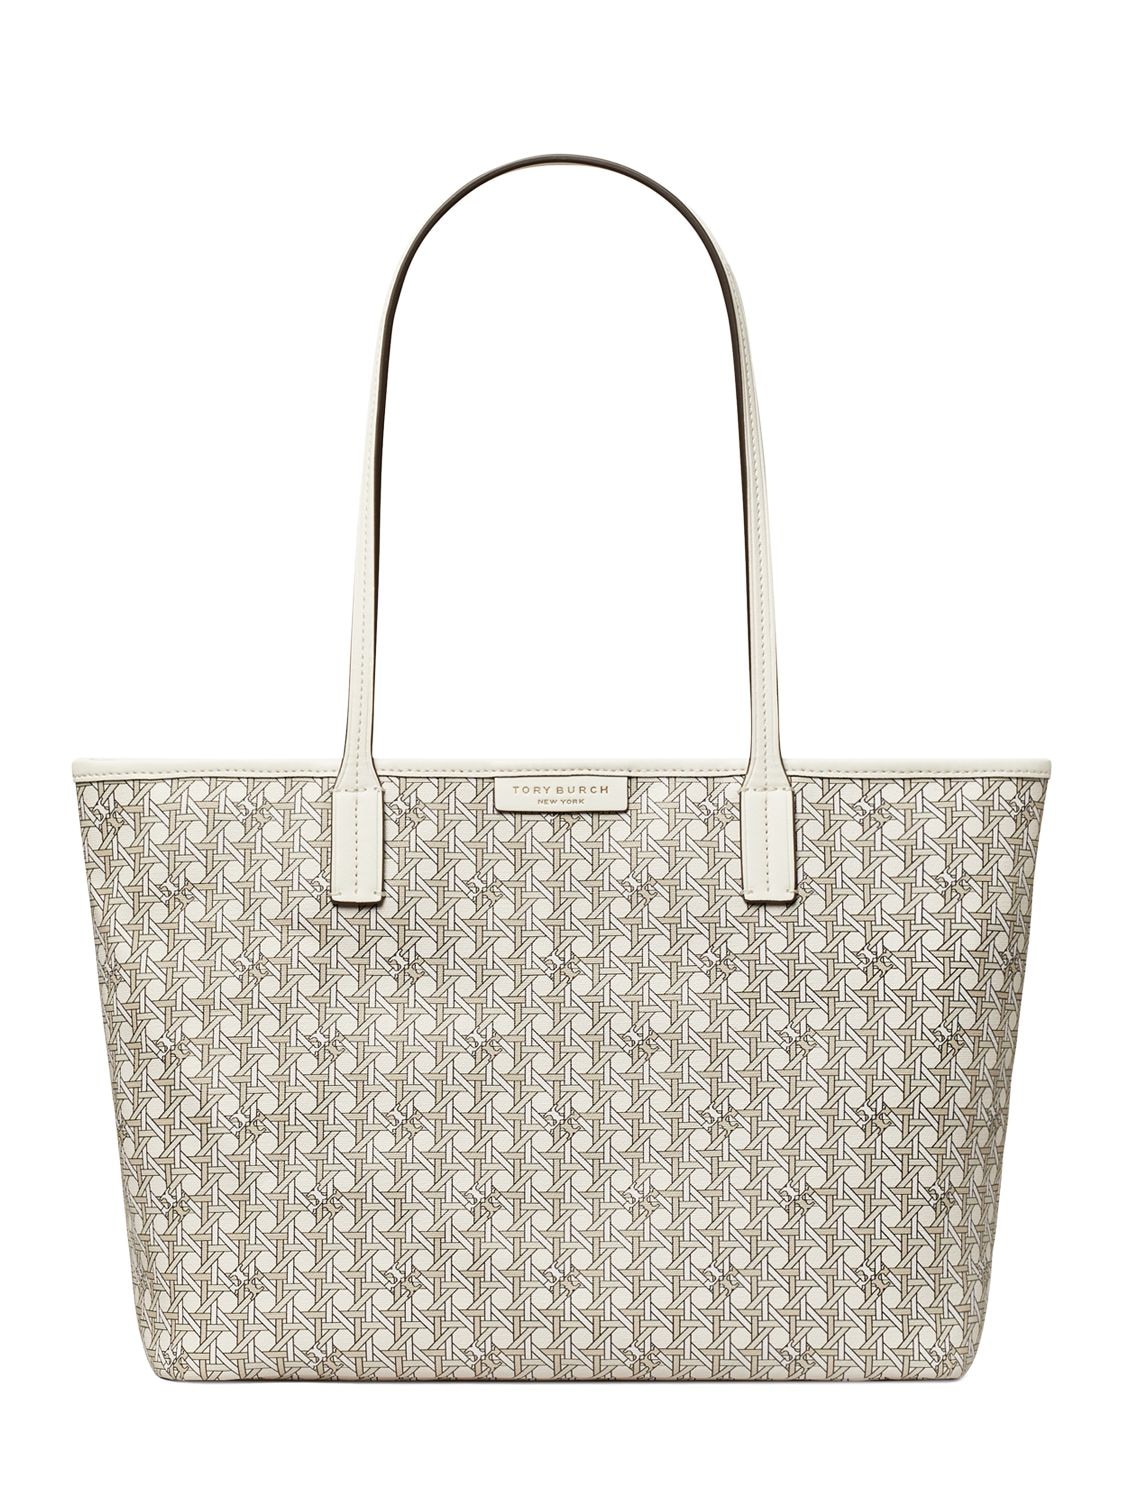 Tory Burch Small Coated Cotton Zip Tote Bag In New Ivory